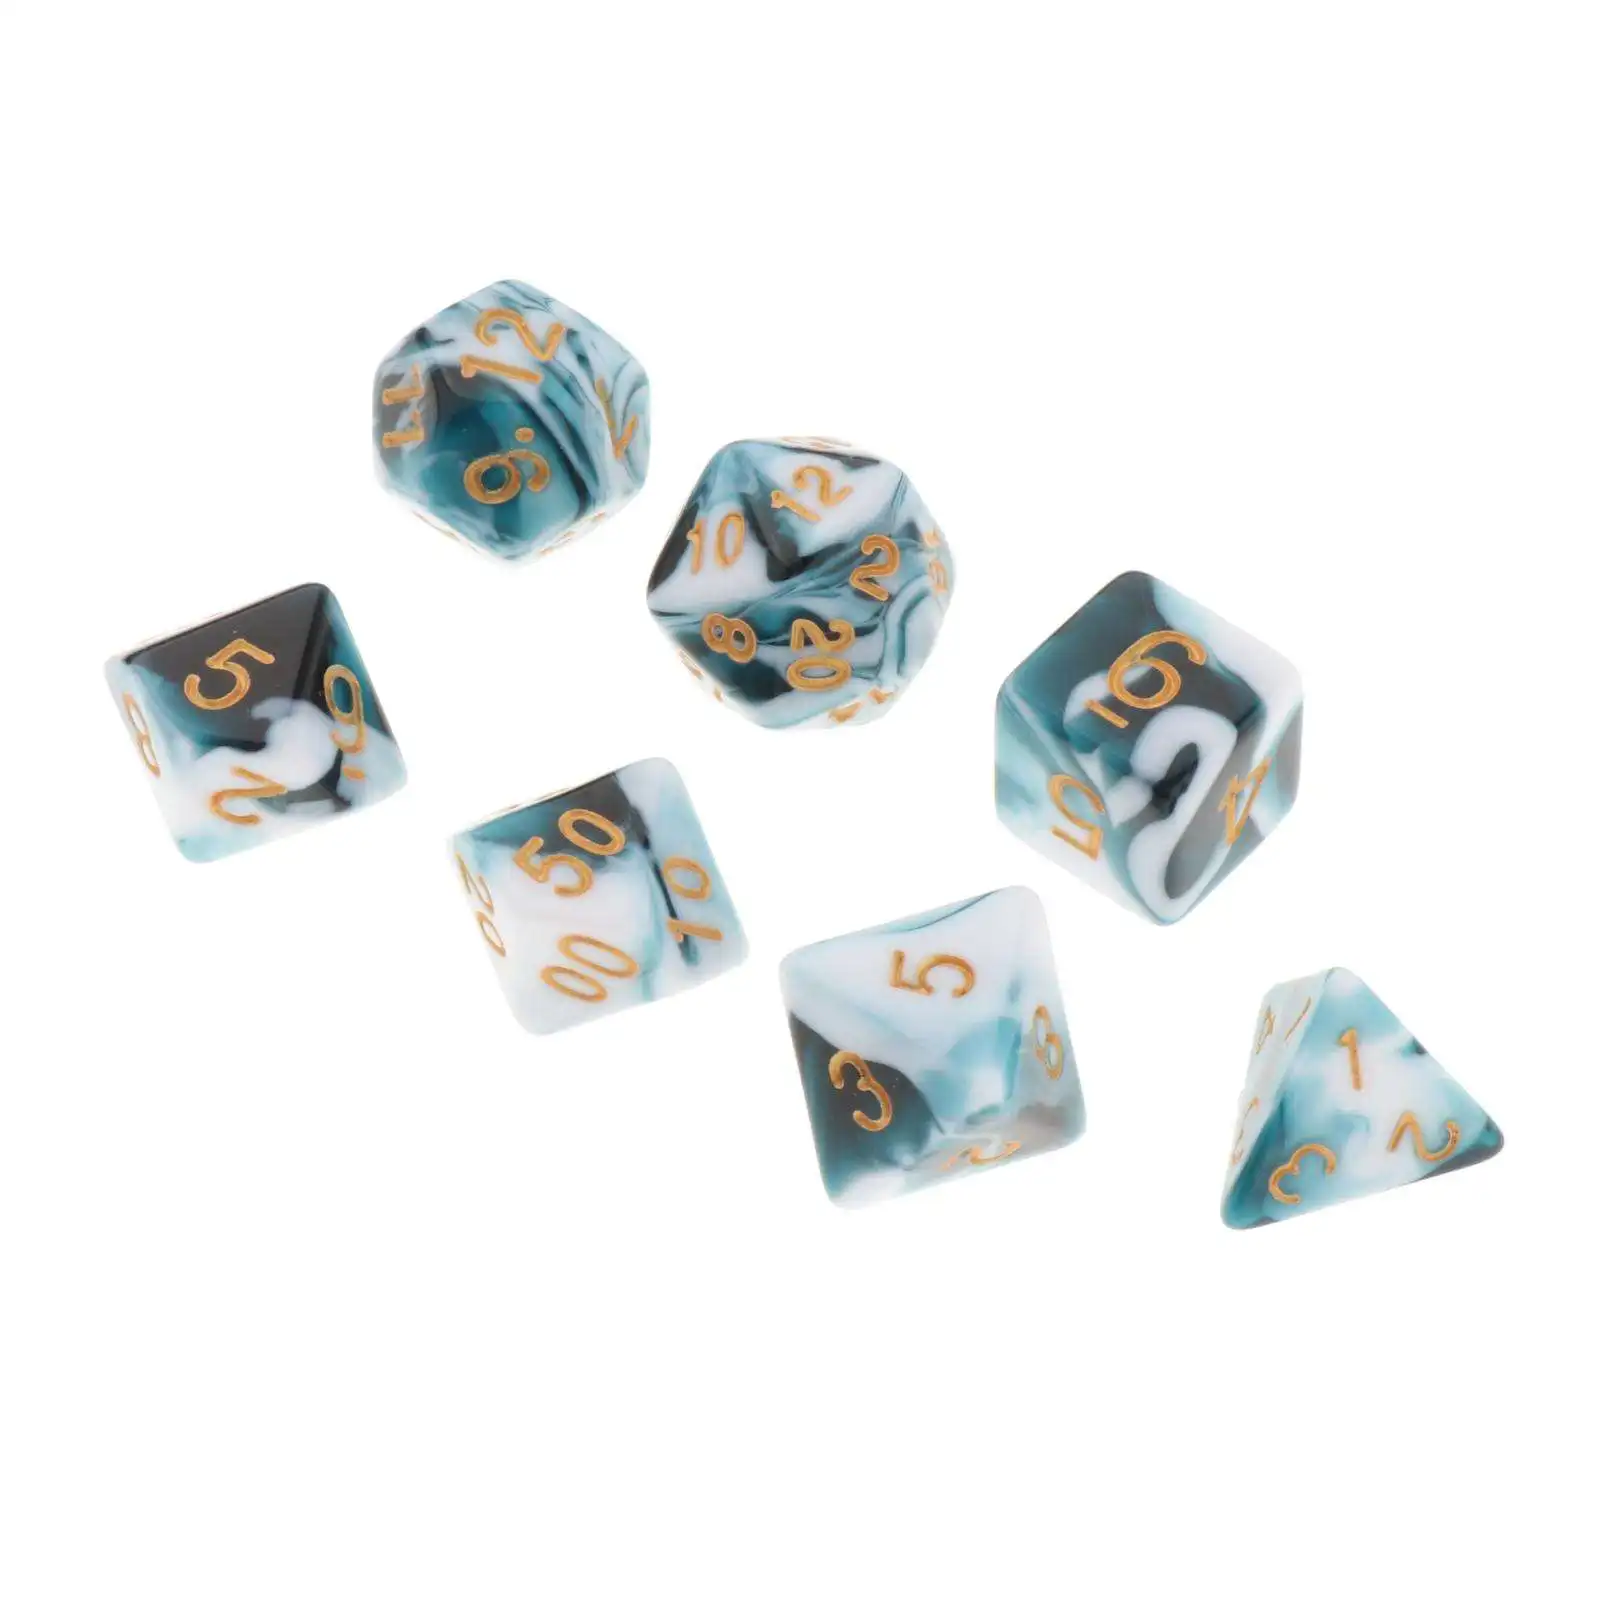 Acrylic Polyhedral Dice Table Games Multi-Sided Party Supply Role Playing Dice for Dnd